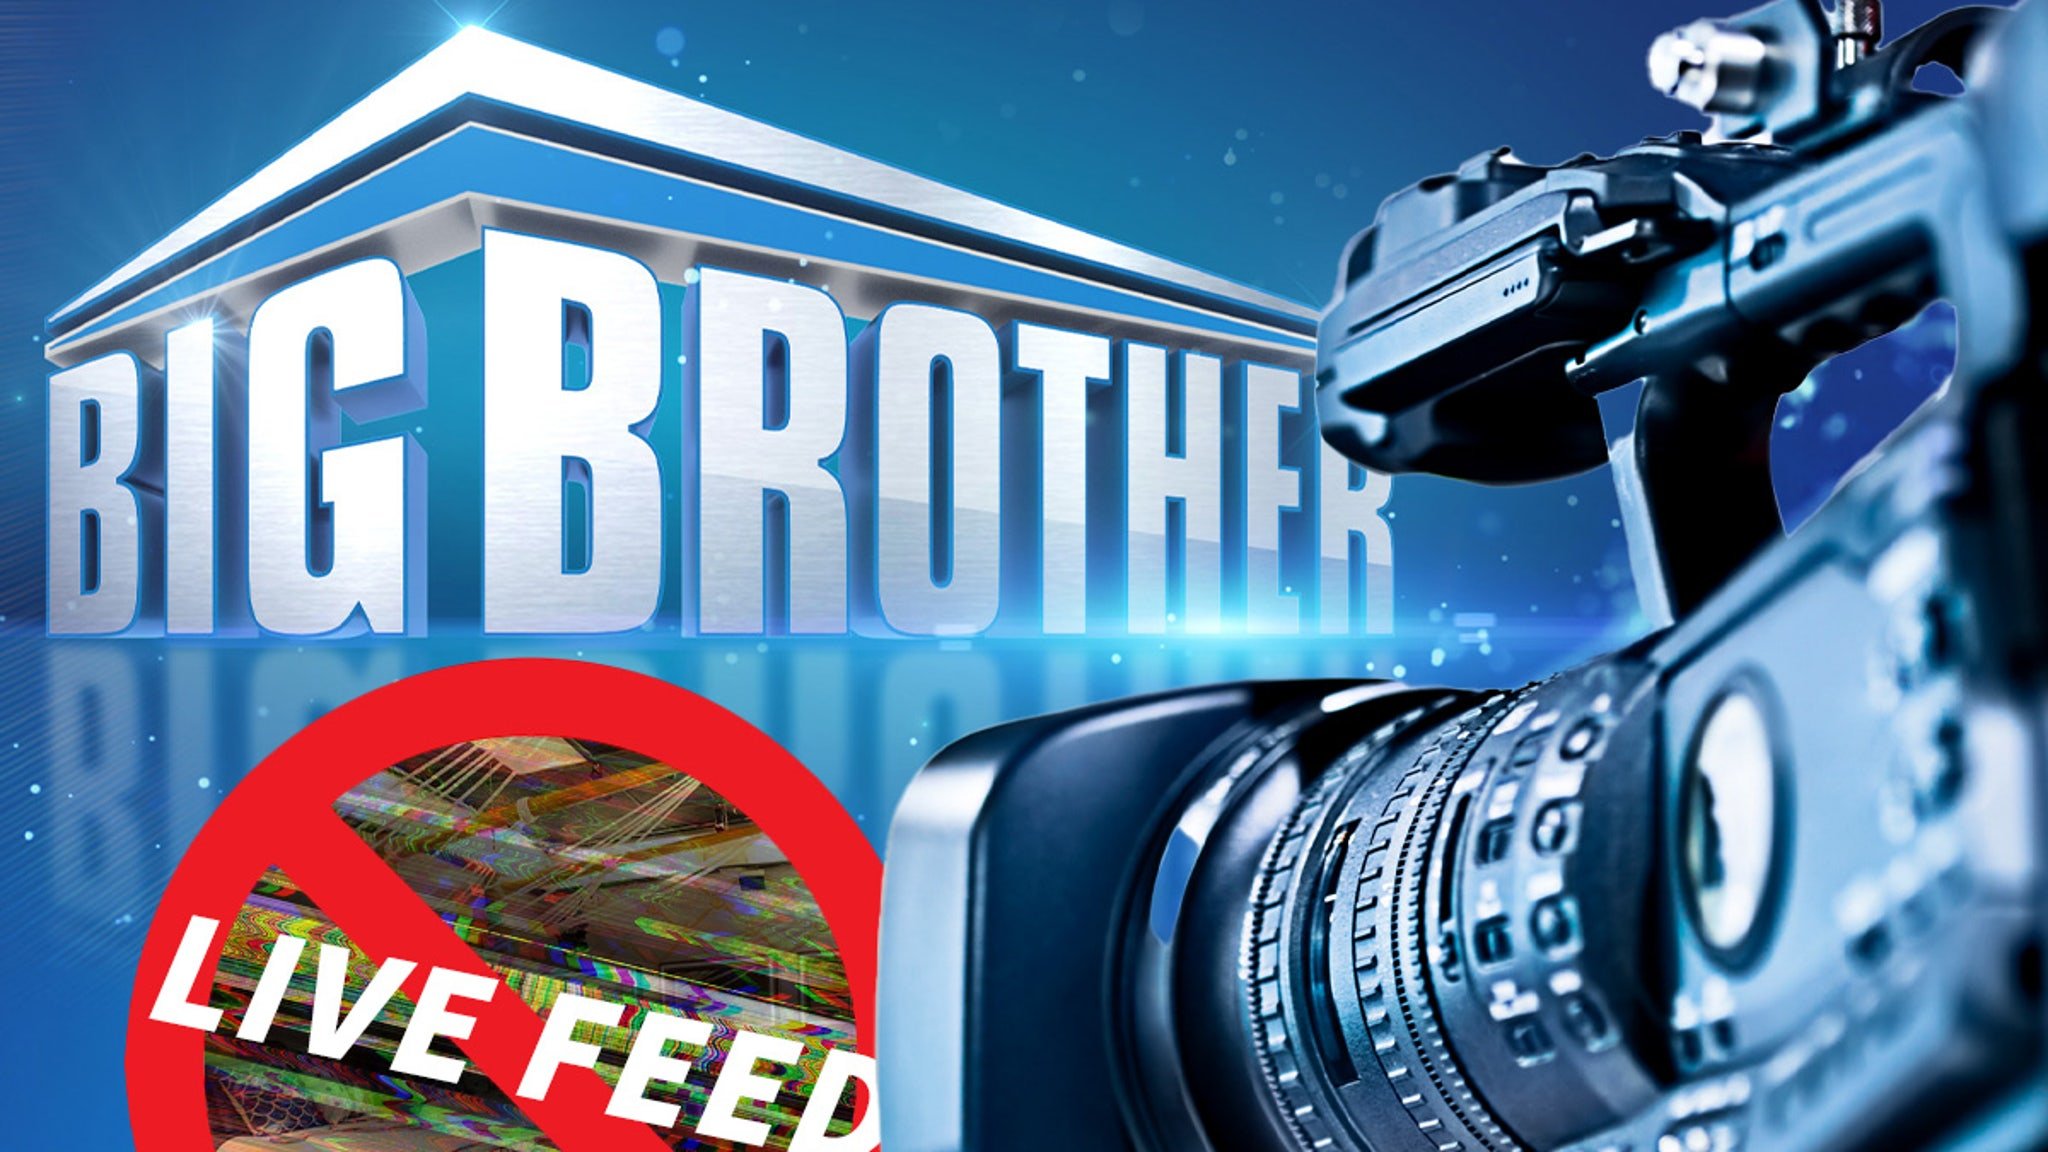 'Big Brother' Have Axed Flashbacks and Archives For New Season, Fans Pissed